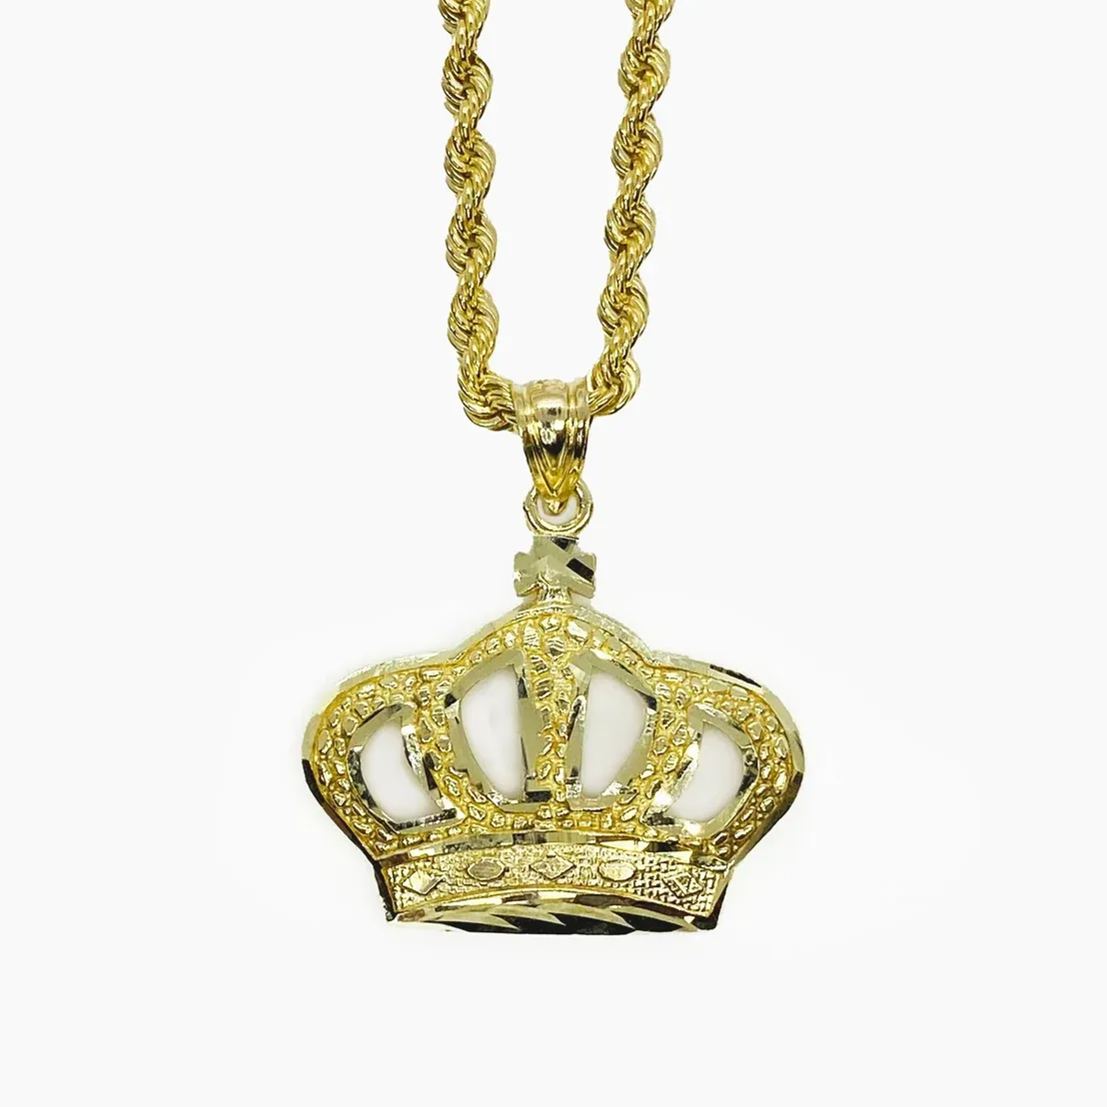 [Copy]Gold Plated Nugget Diamond Shaped Pendant Charm Necklace